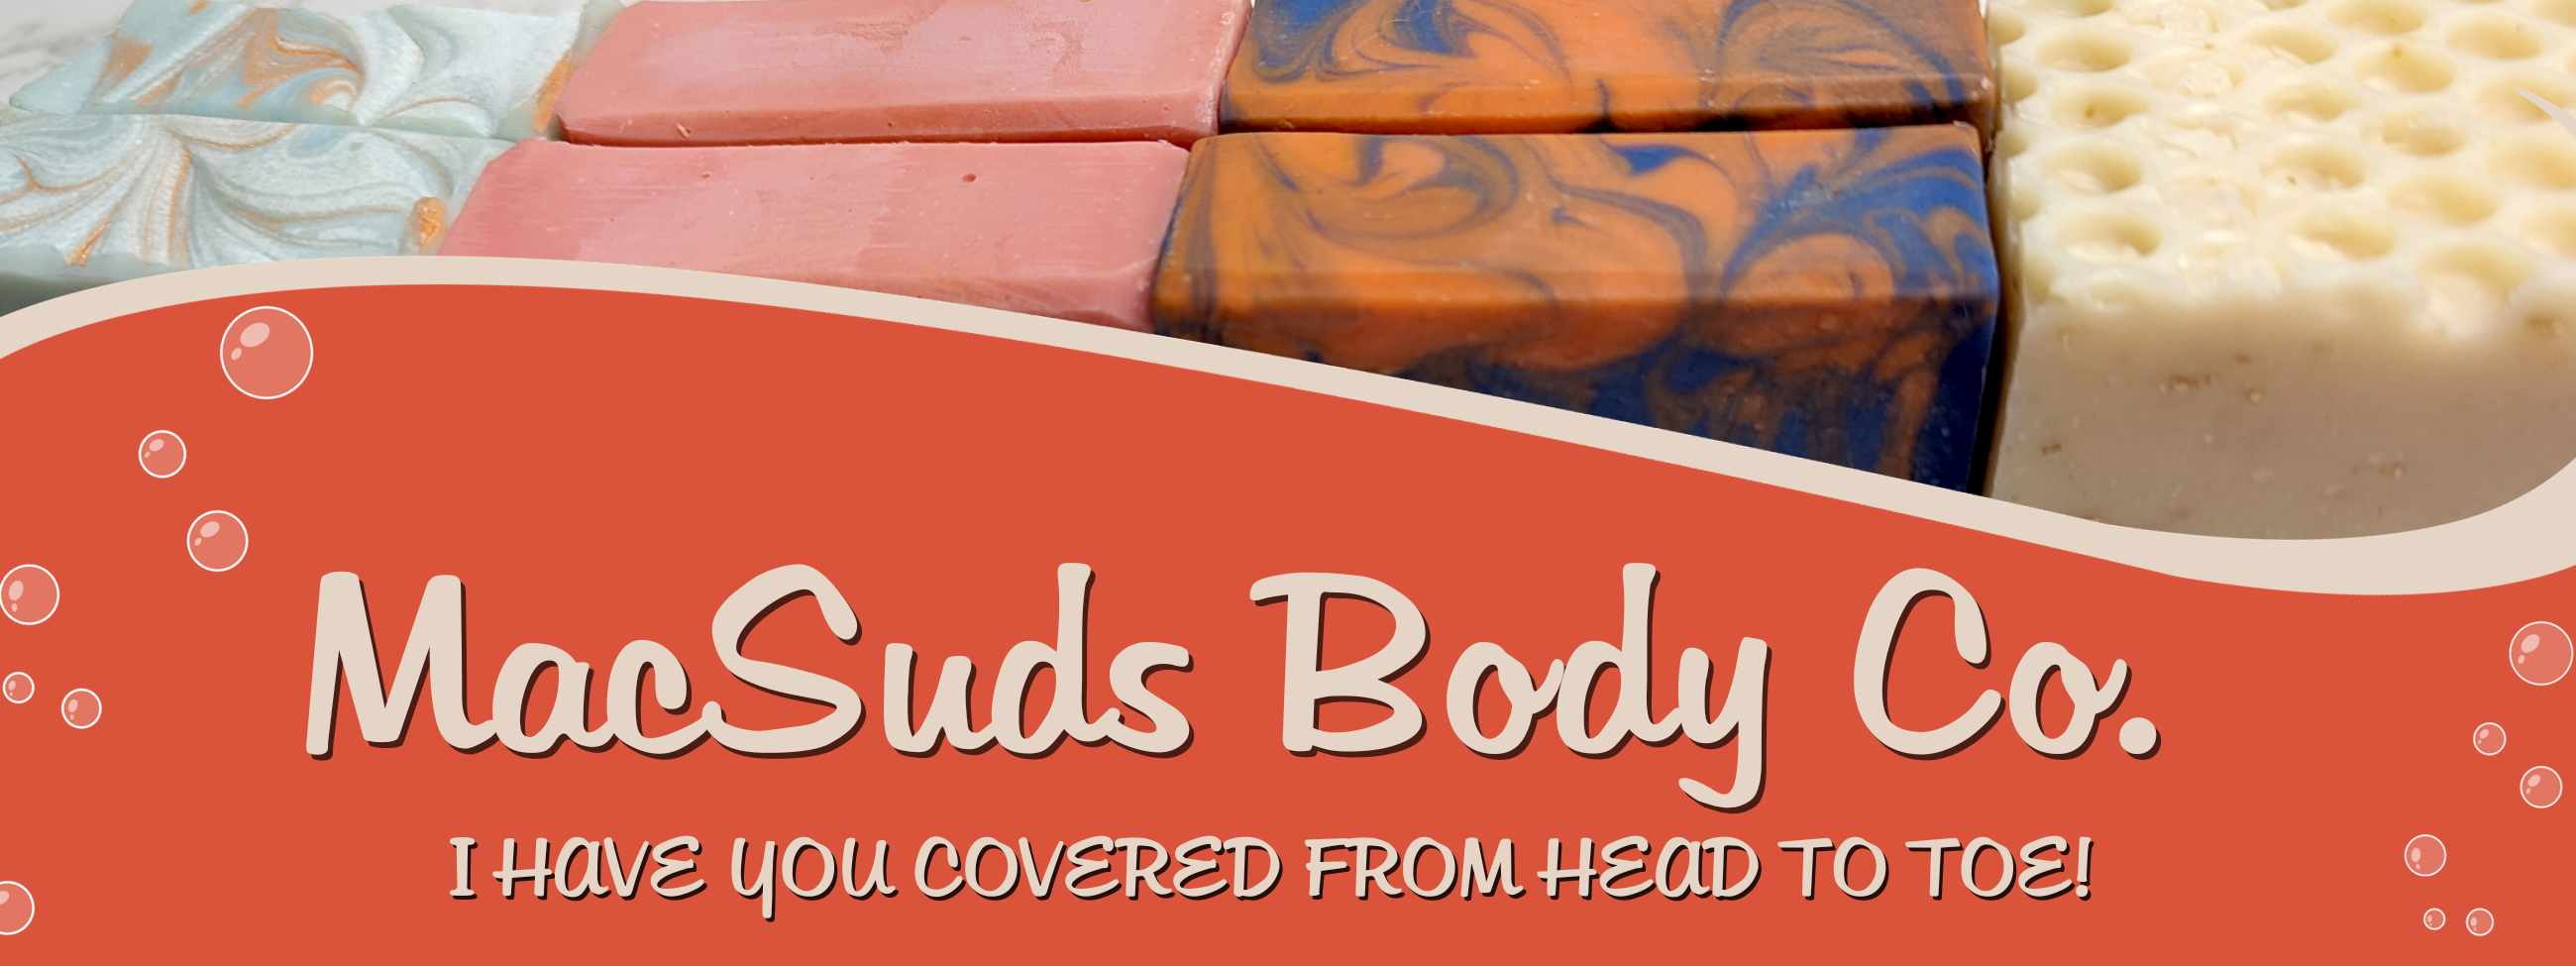 Mac Suds Body Co. - I Have You Covered From Head To Toe! 